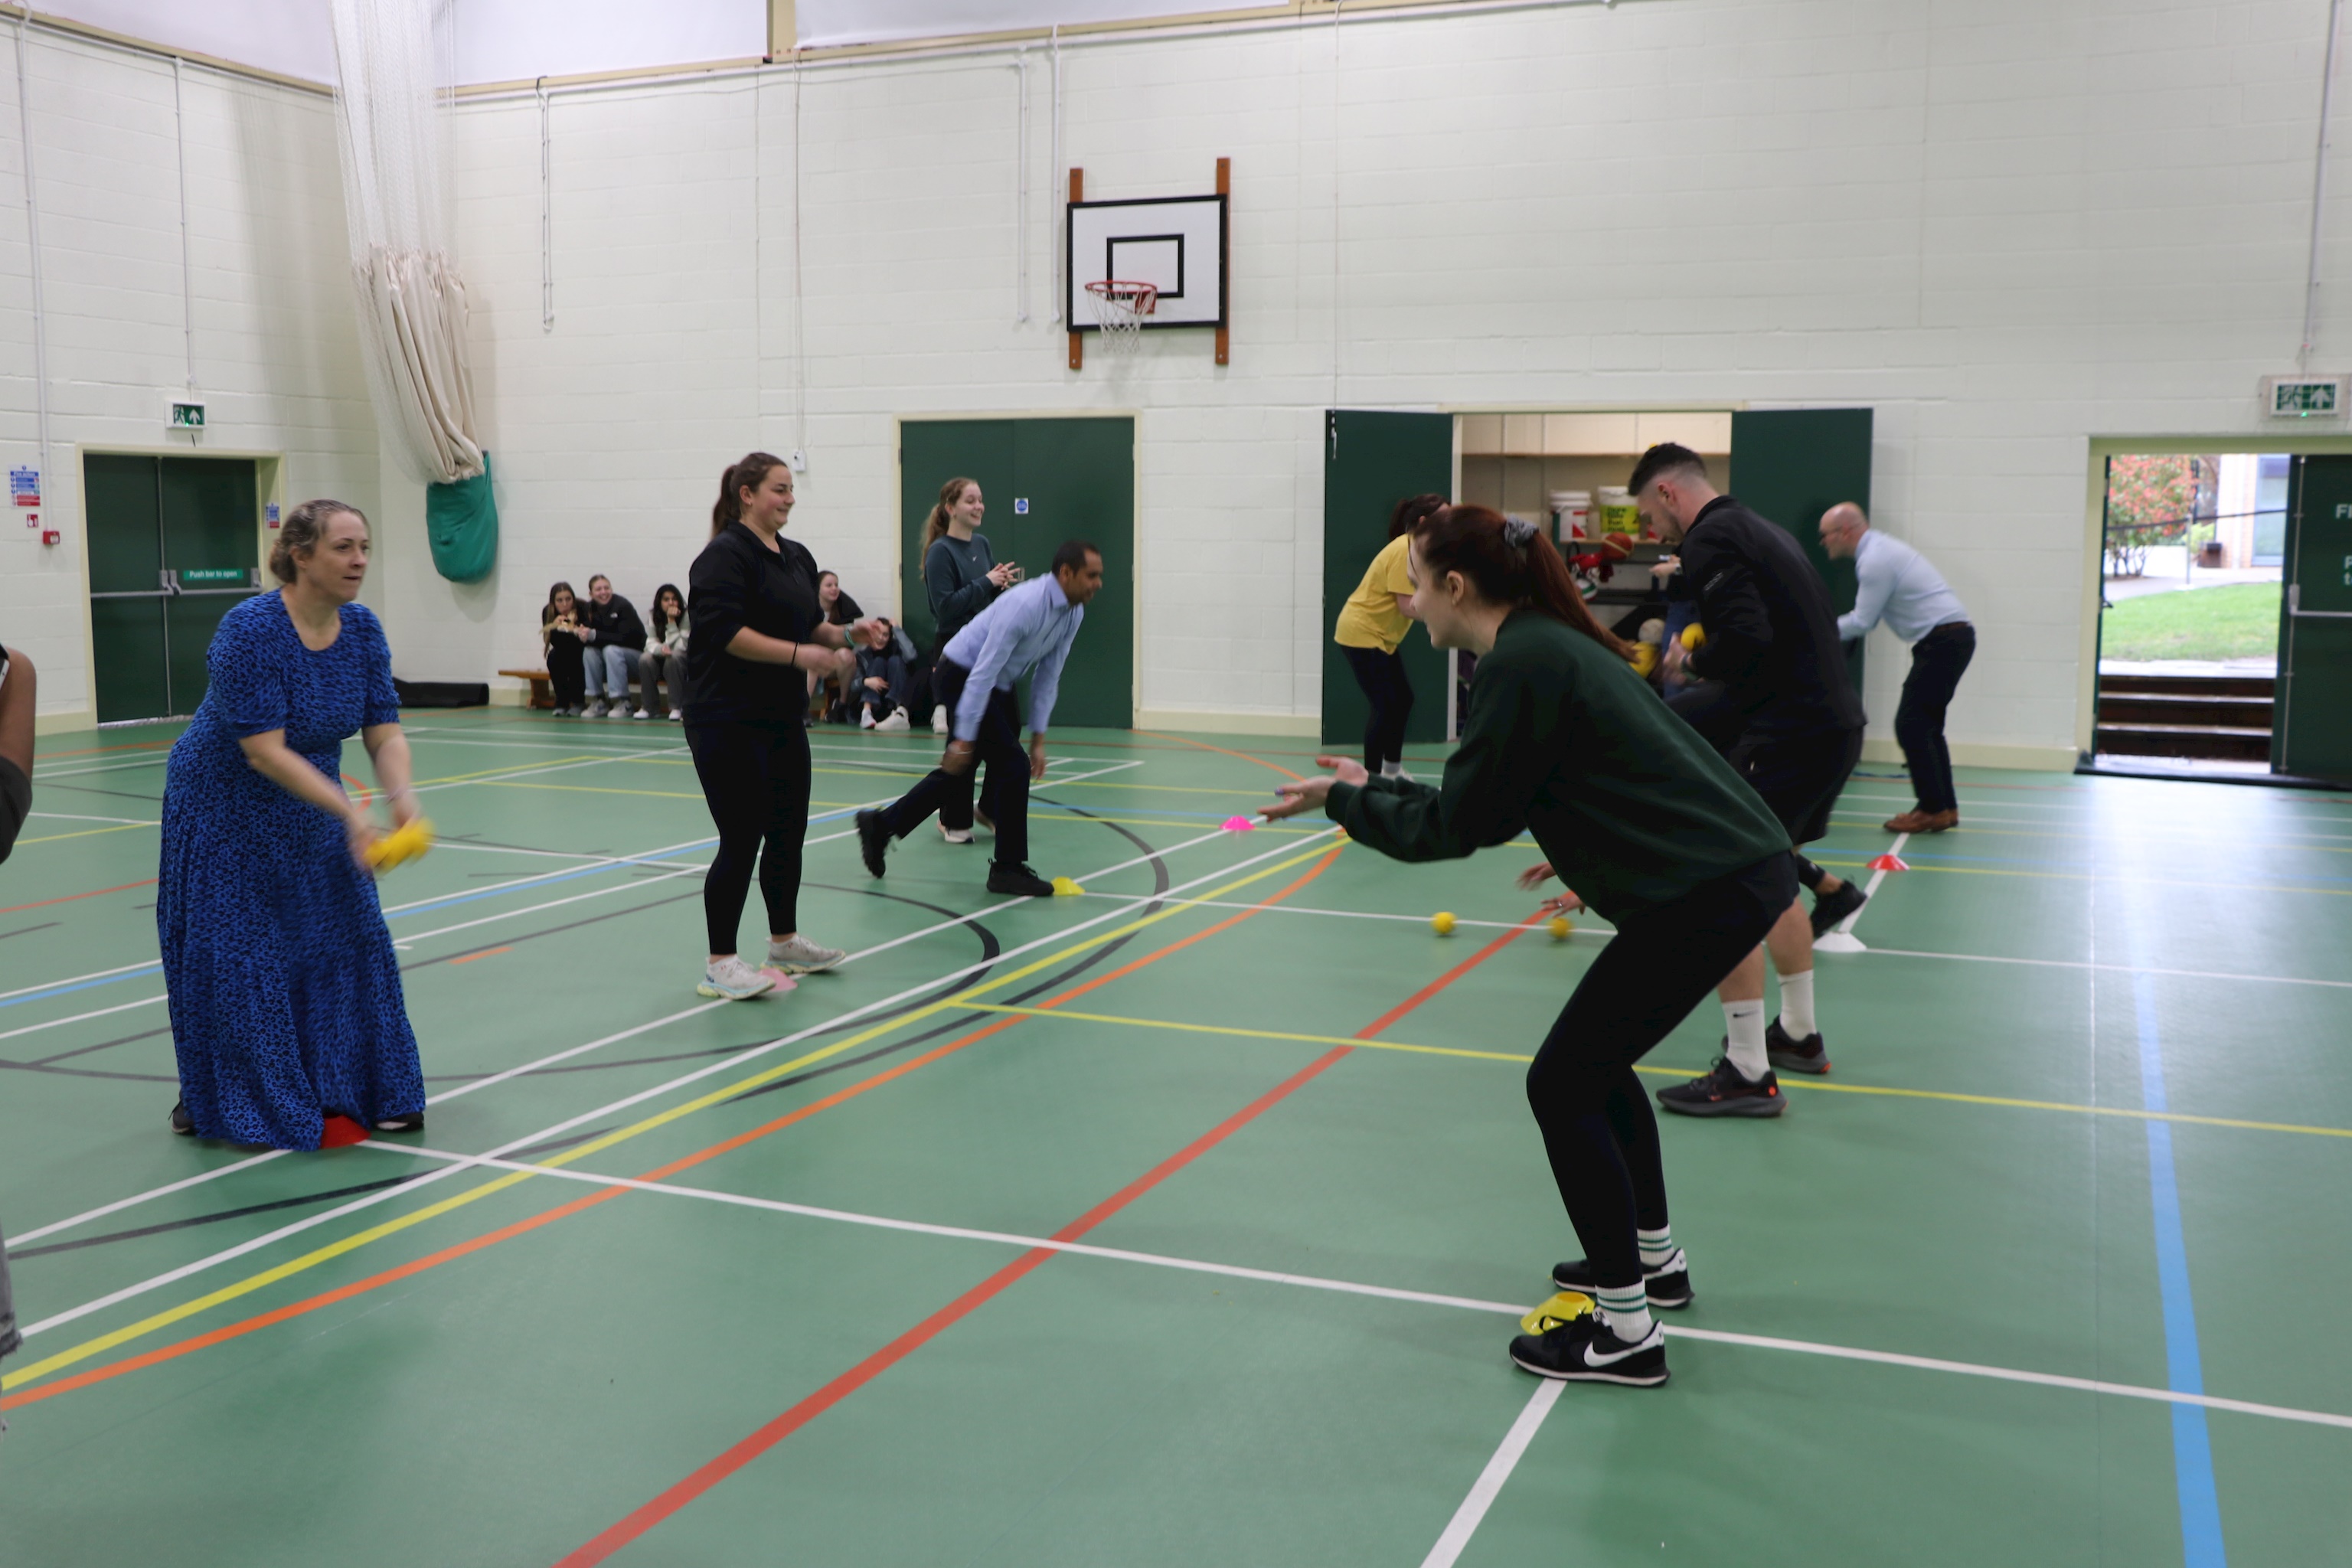 Staff members taking part in a sports science competition. They are in the sports hall playing 'catch' with a ball